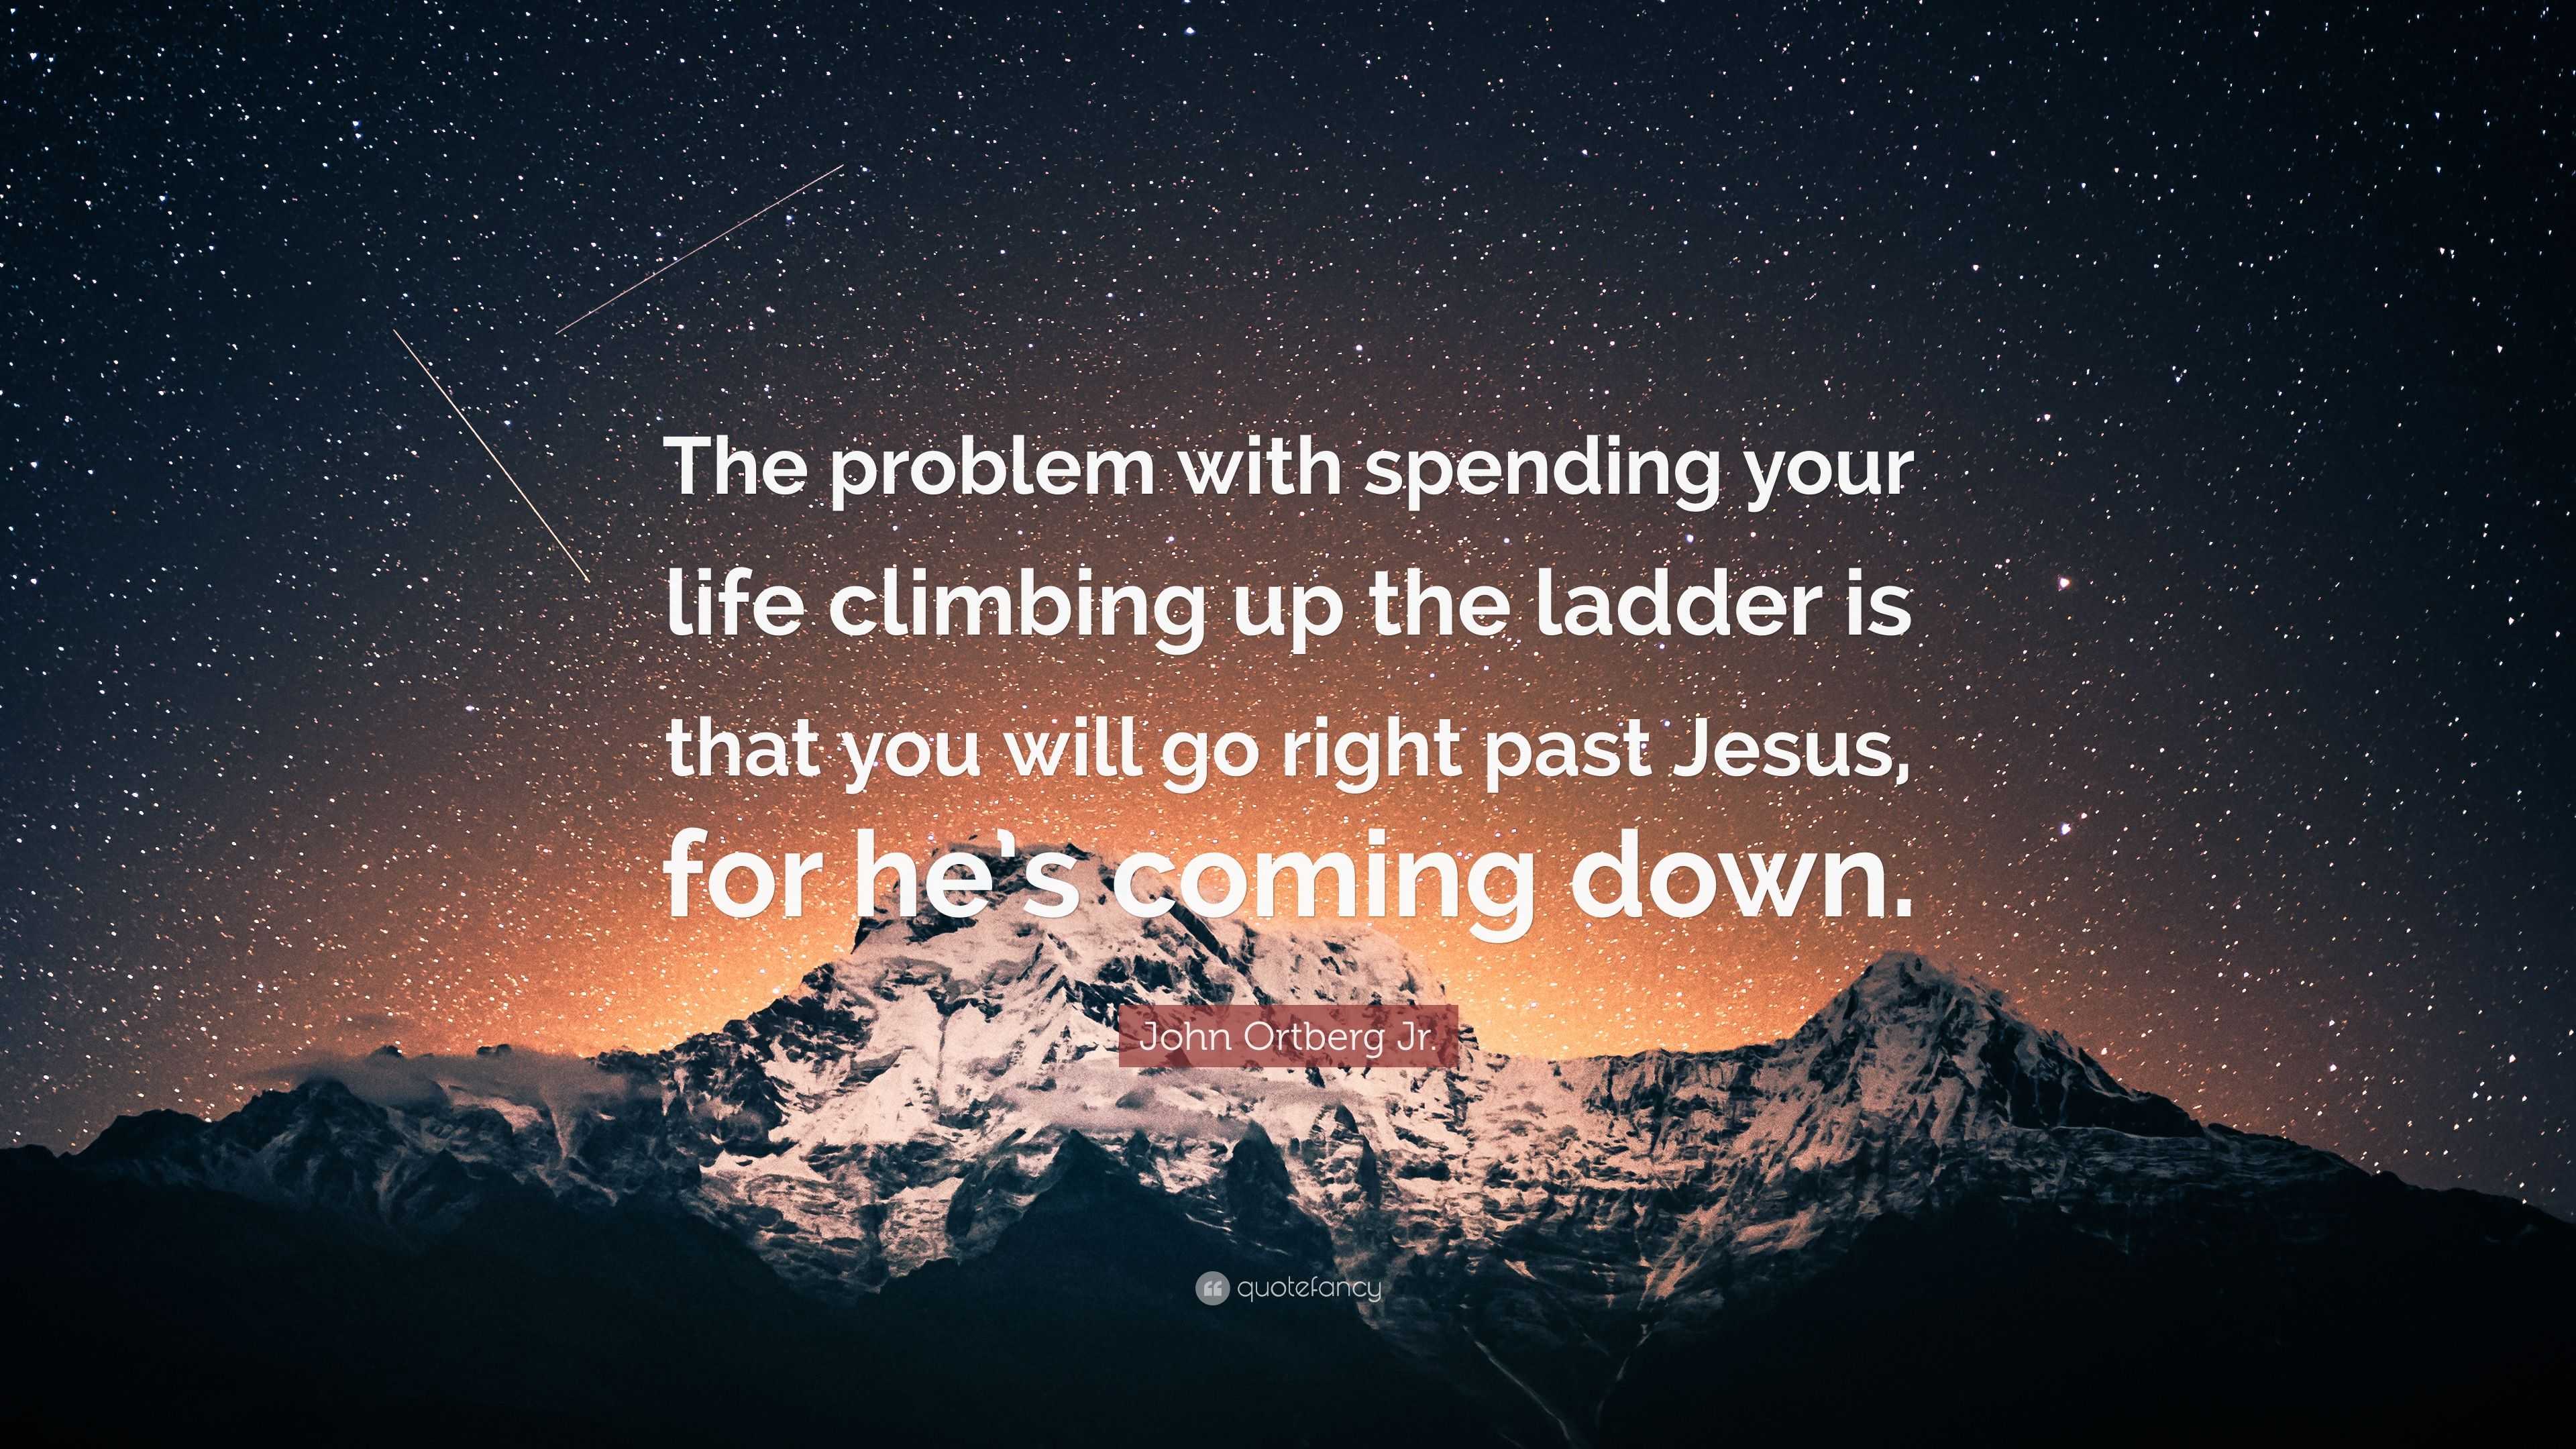 John Ortberg Jr Quote The Problem With Spending Your Life Climbing Up The Ladder Is That You Will Go Right Past Jesus For He S Coming Down 10 Wallpapers Quotefancy